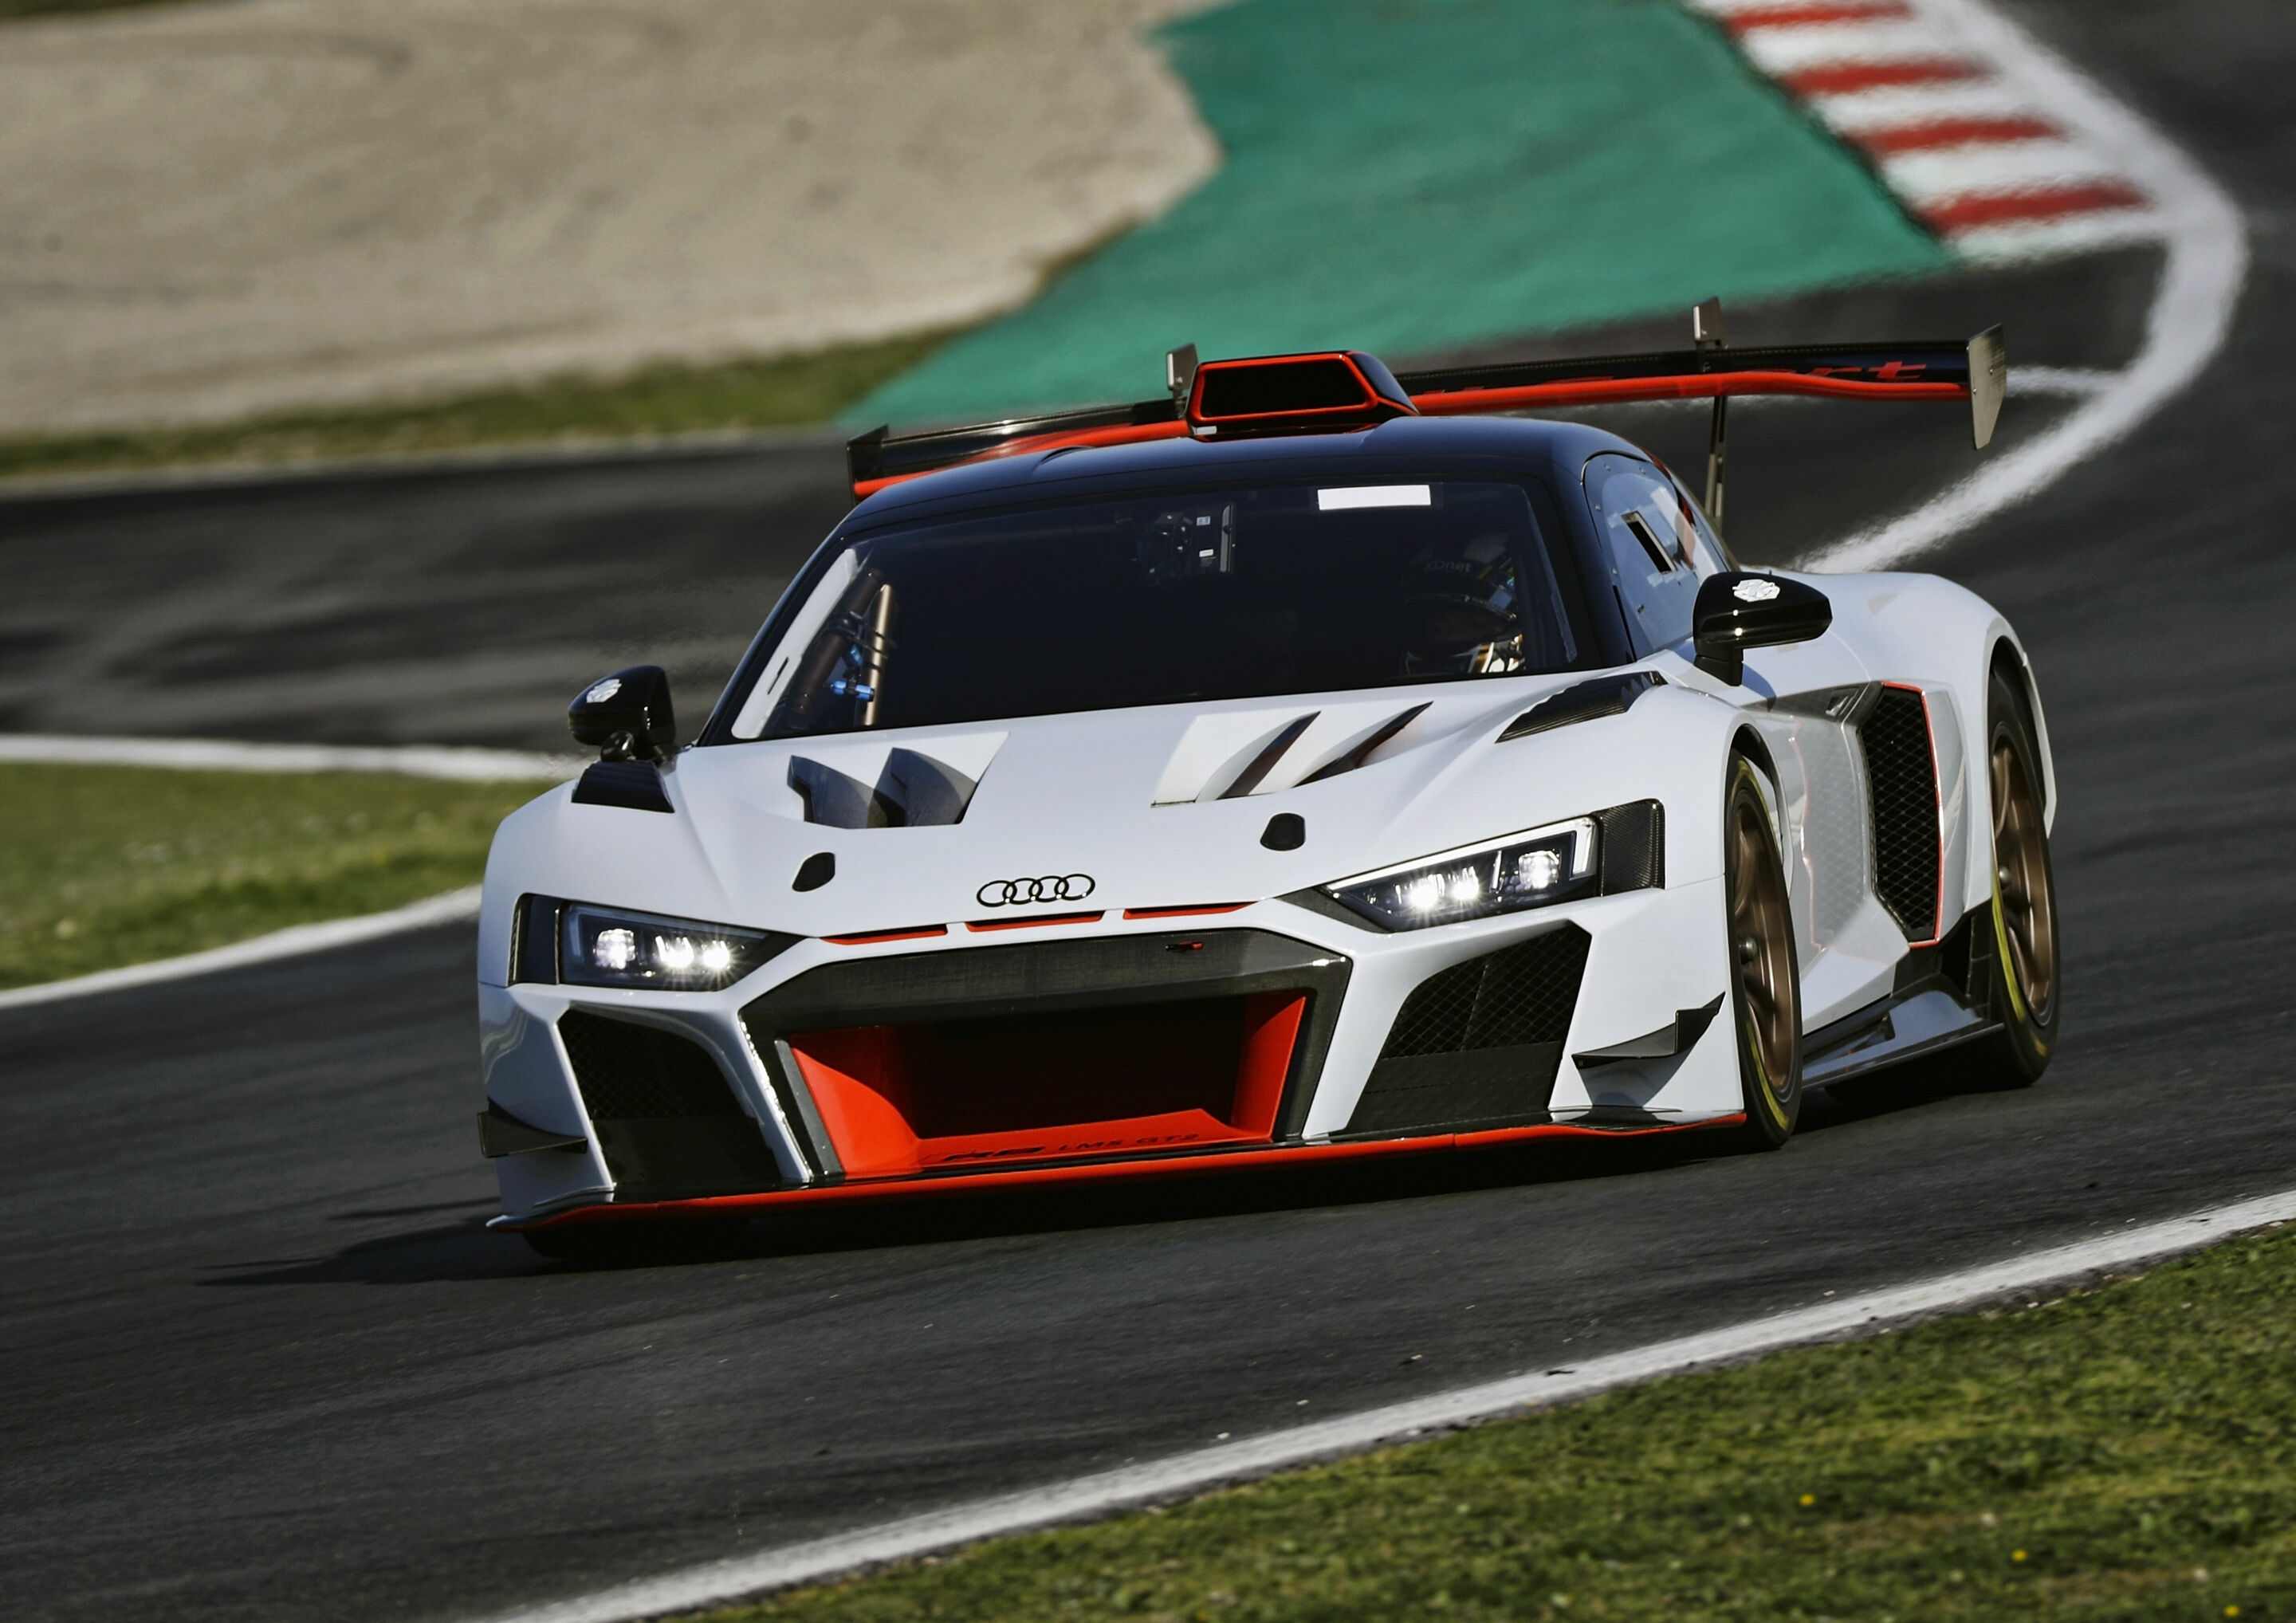 18 Audi R8 LMS cars at the season opener in Monza